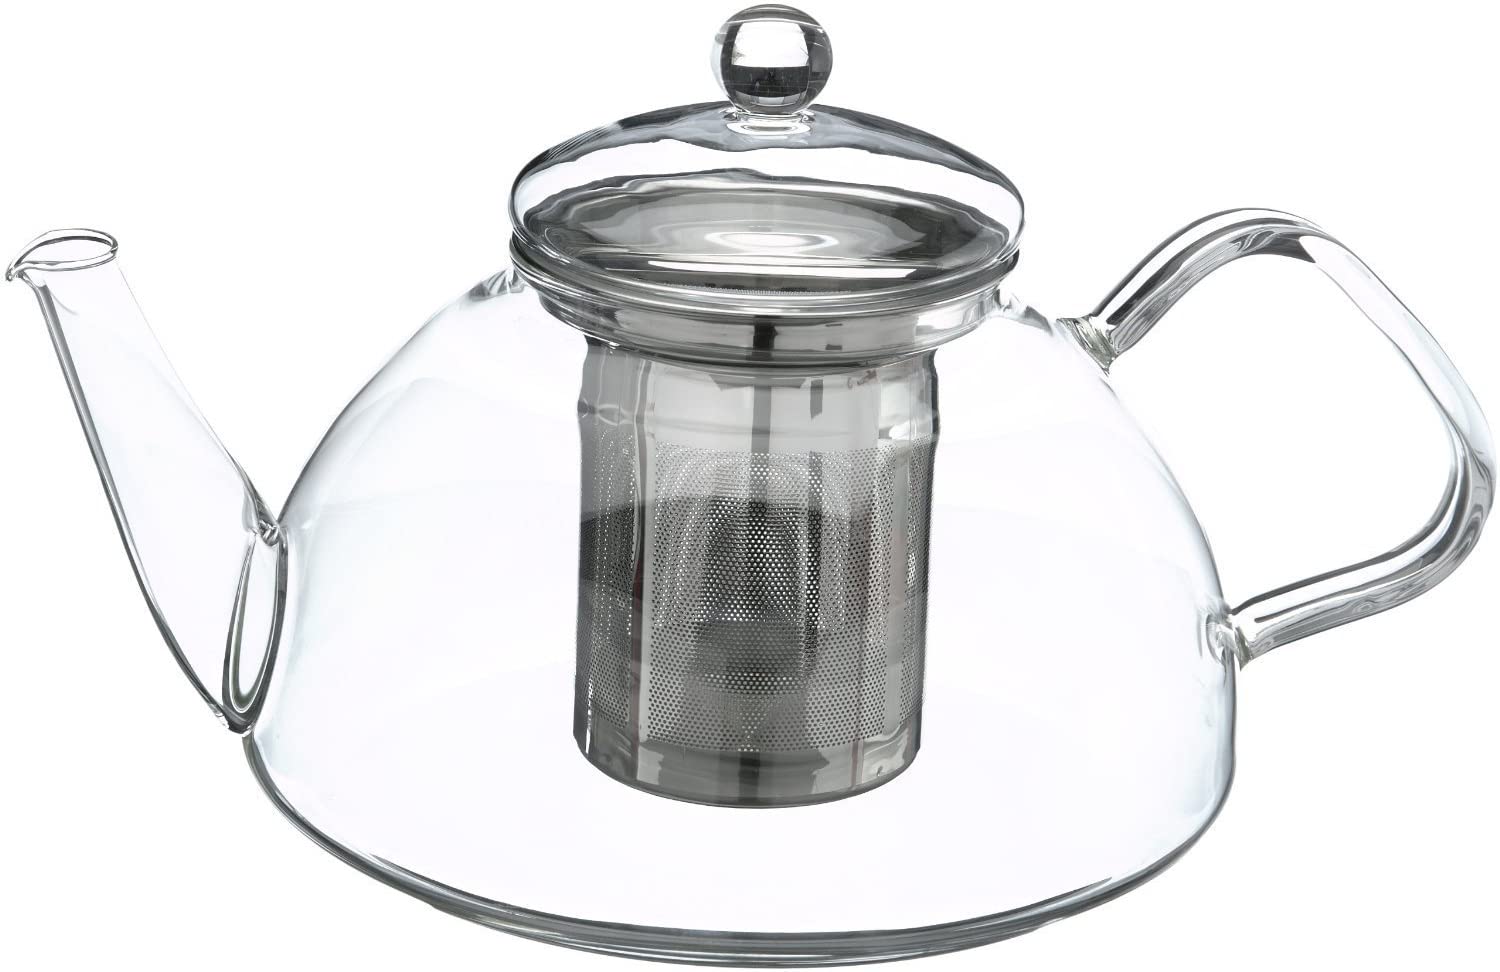 Trendglas Jena Theo Teapot in Traditional Design with Stainless Steel Sieve 1.2 Litre